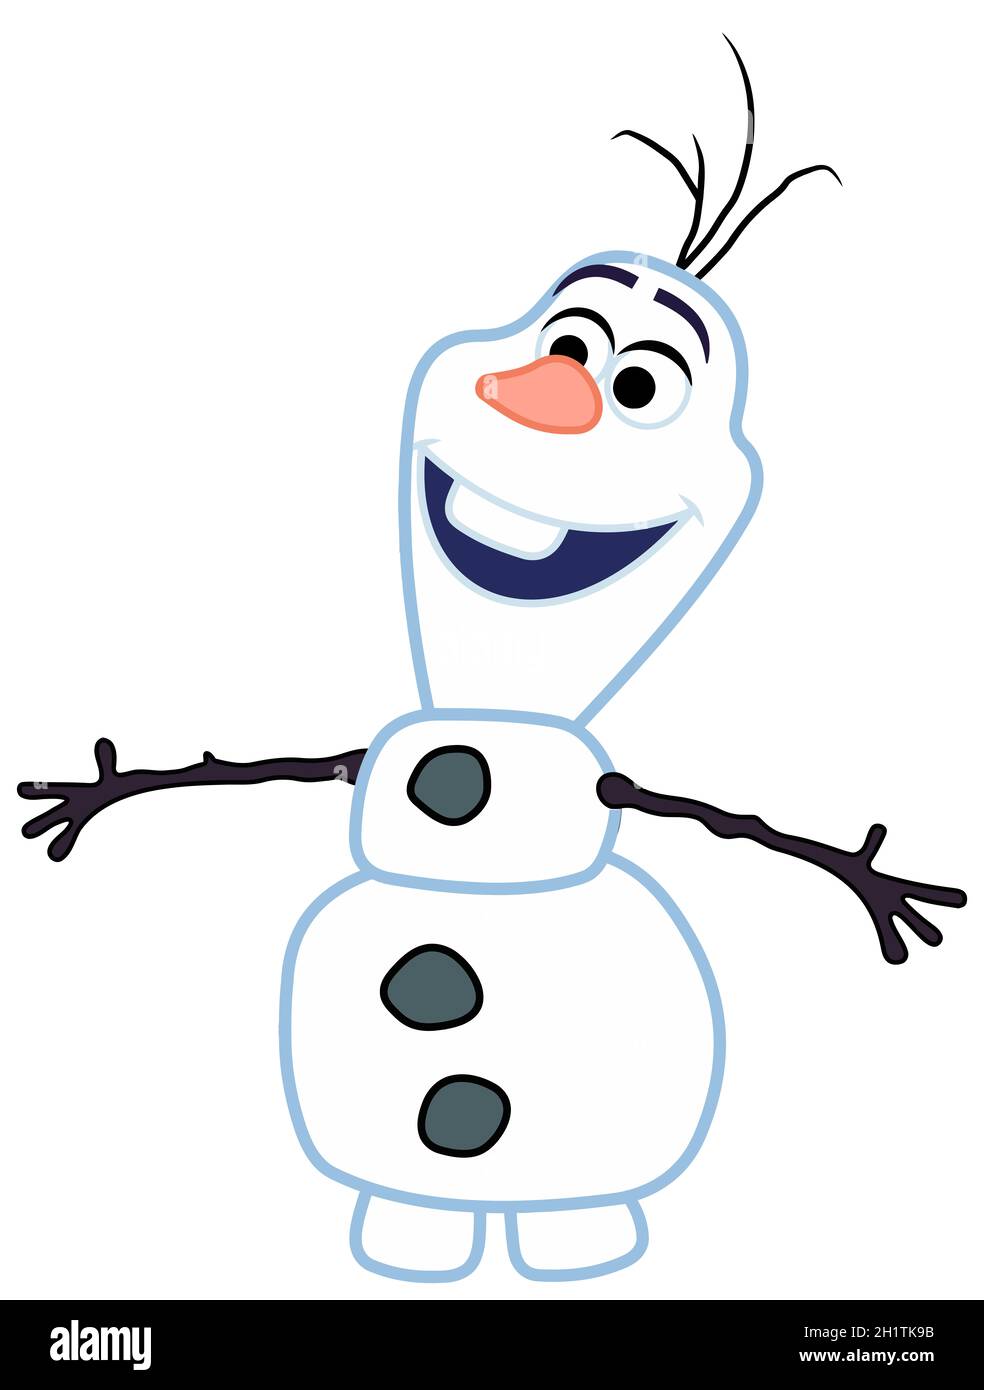 Olaf from Frozen